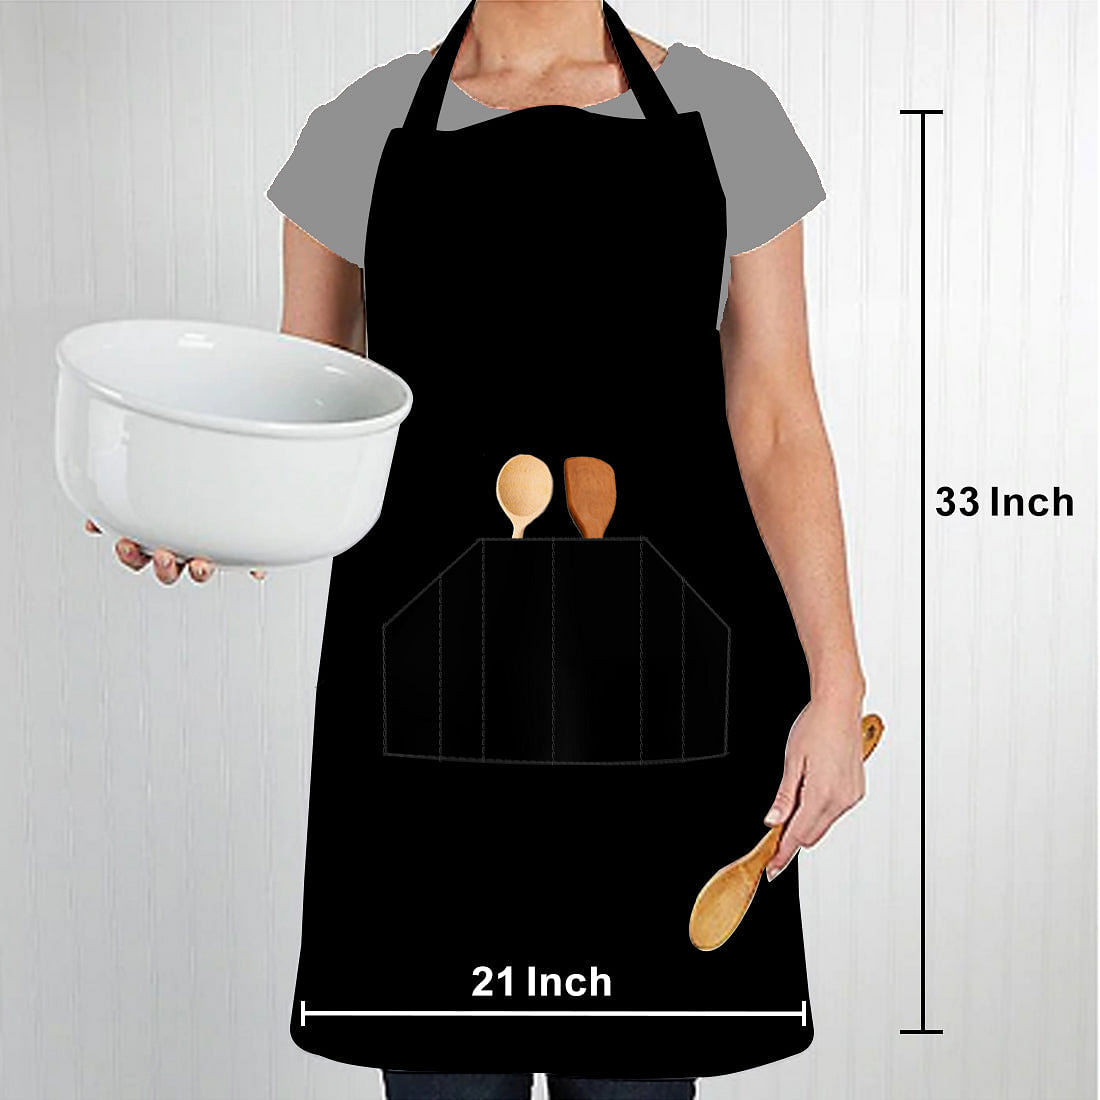 Customized Apron for Kitchen With Name Baking Cooking - Spoon Nutcase